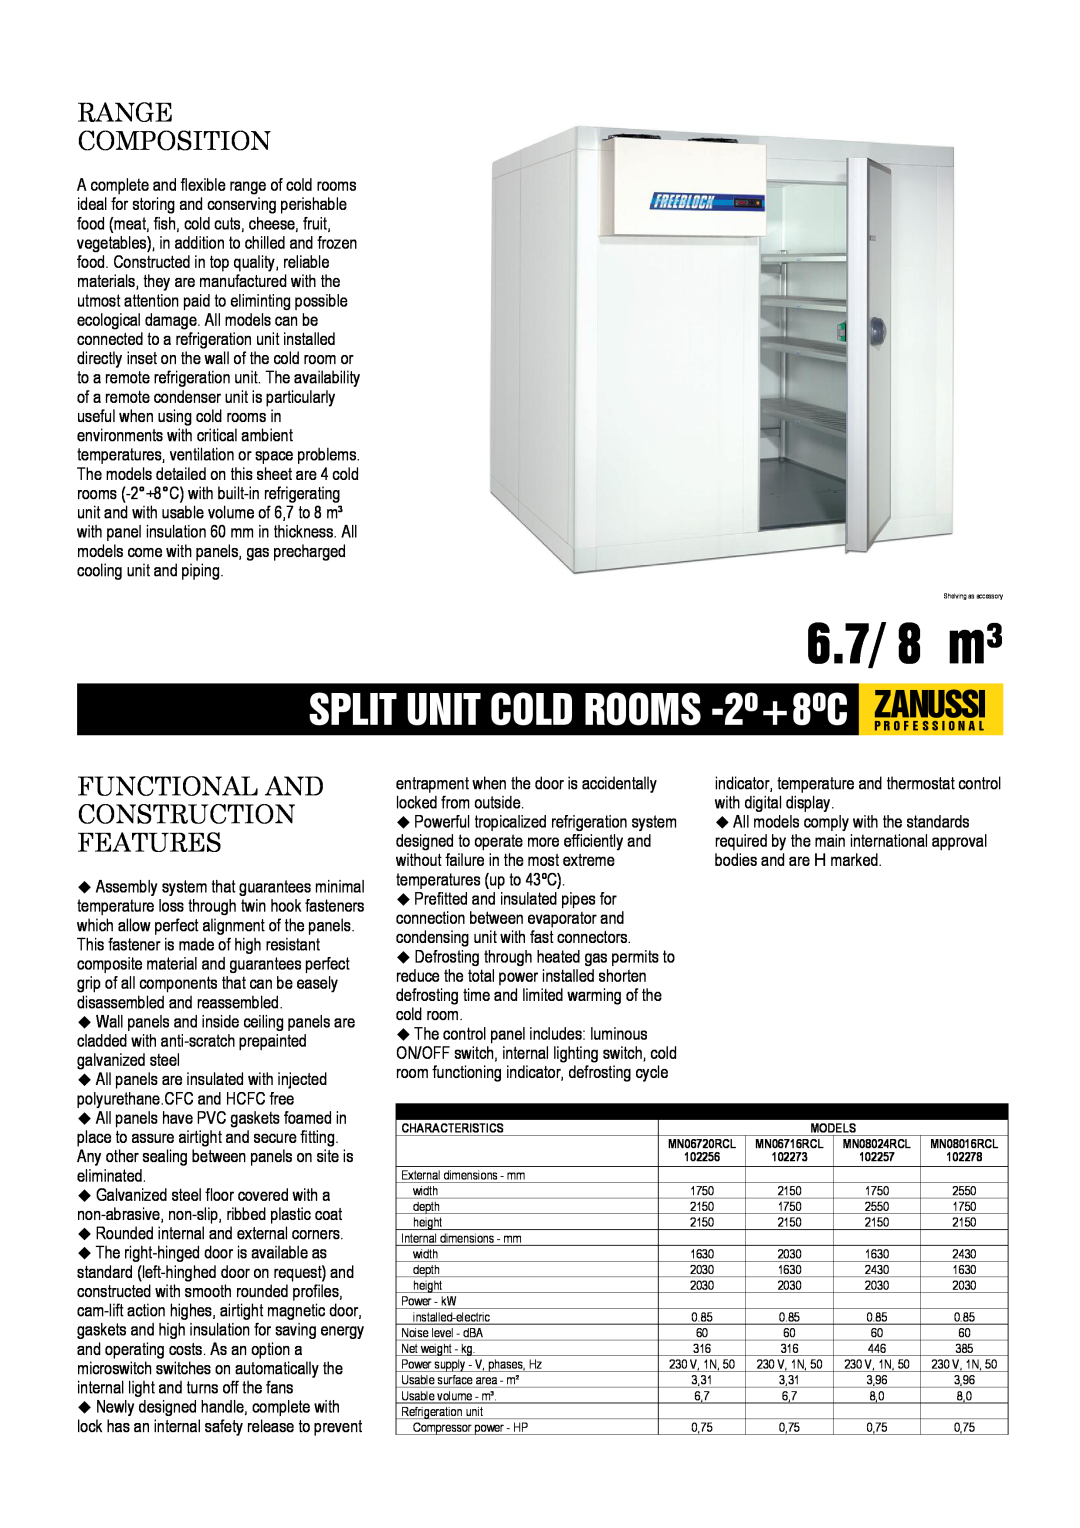 Zanussi MN06716RCL, MN08024RCL, MN08016RCL dimensions 6.7/ 8 m³, Range Composition, Functional And Construction Features 